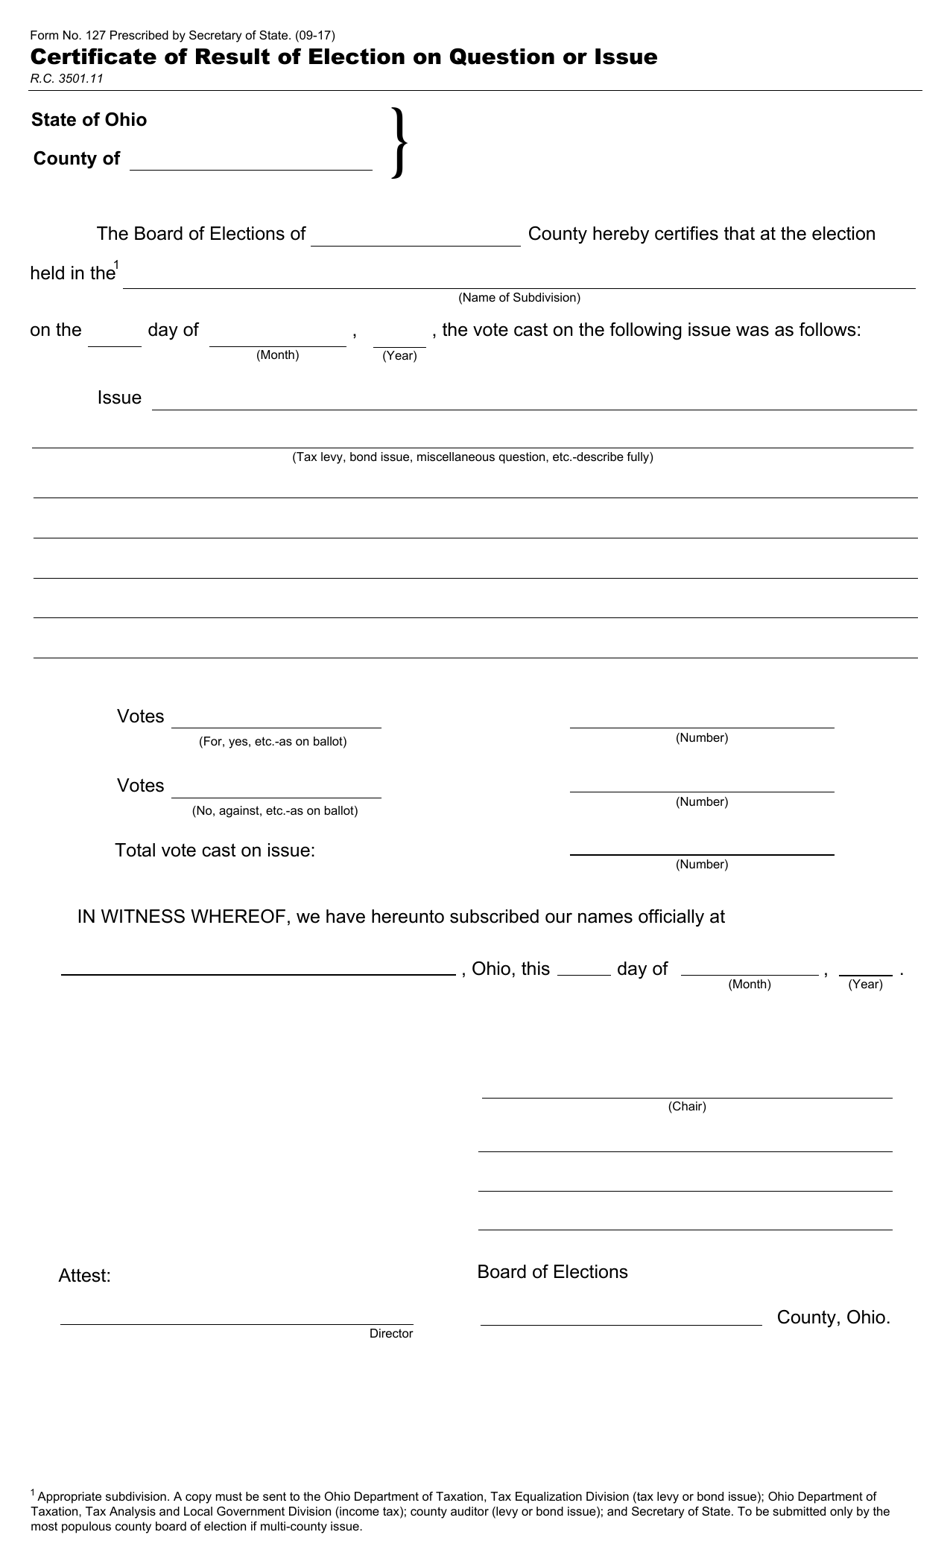 Form 127 Certificate of Result of Election on Question or Issue - Ohio, Page 1